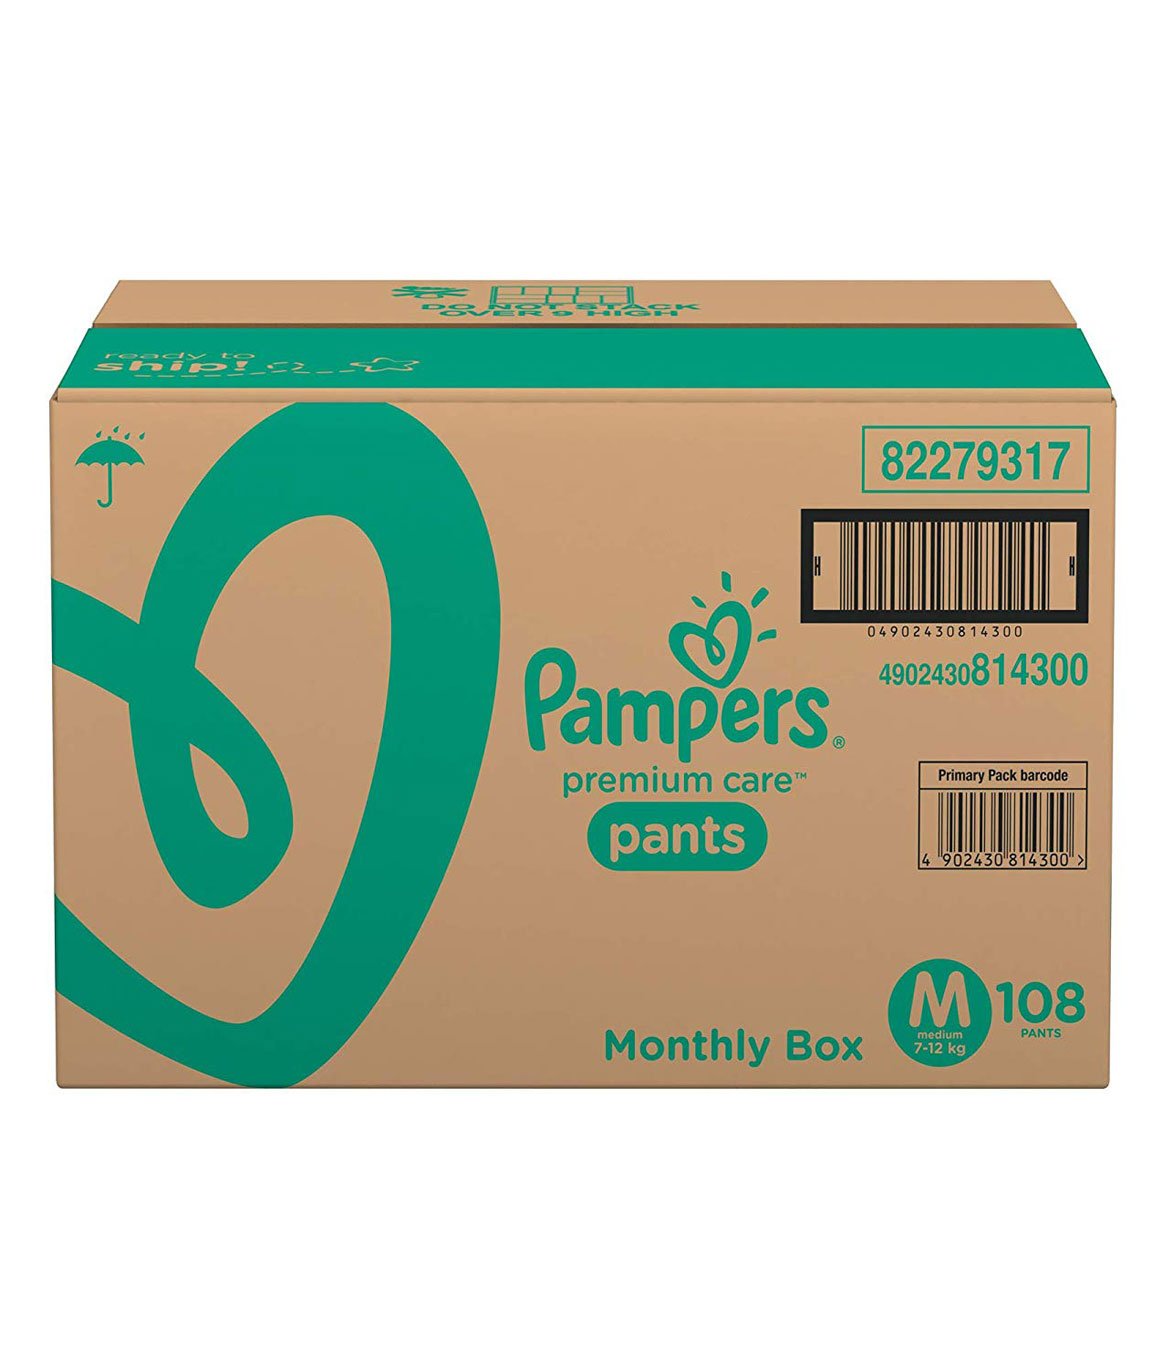 Buy Pampers Premium Care Pants Diapers, Small, S 72 Count & Pampers Premium  Care Pants Diapers, Medium, 54 Count Online at Low Prices in India -  Amazon.in